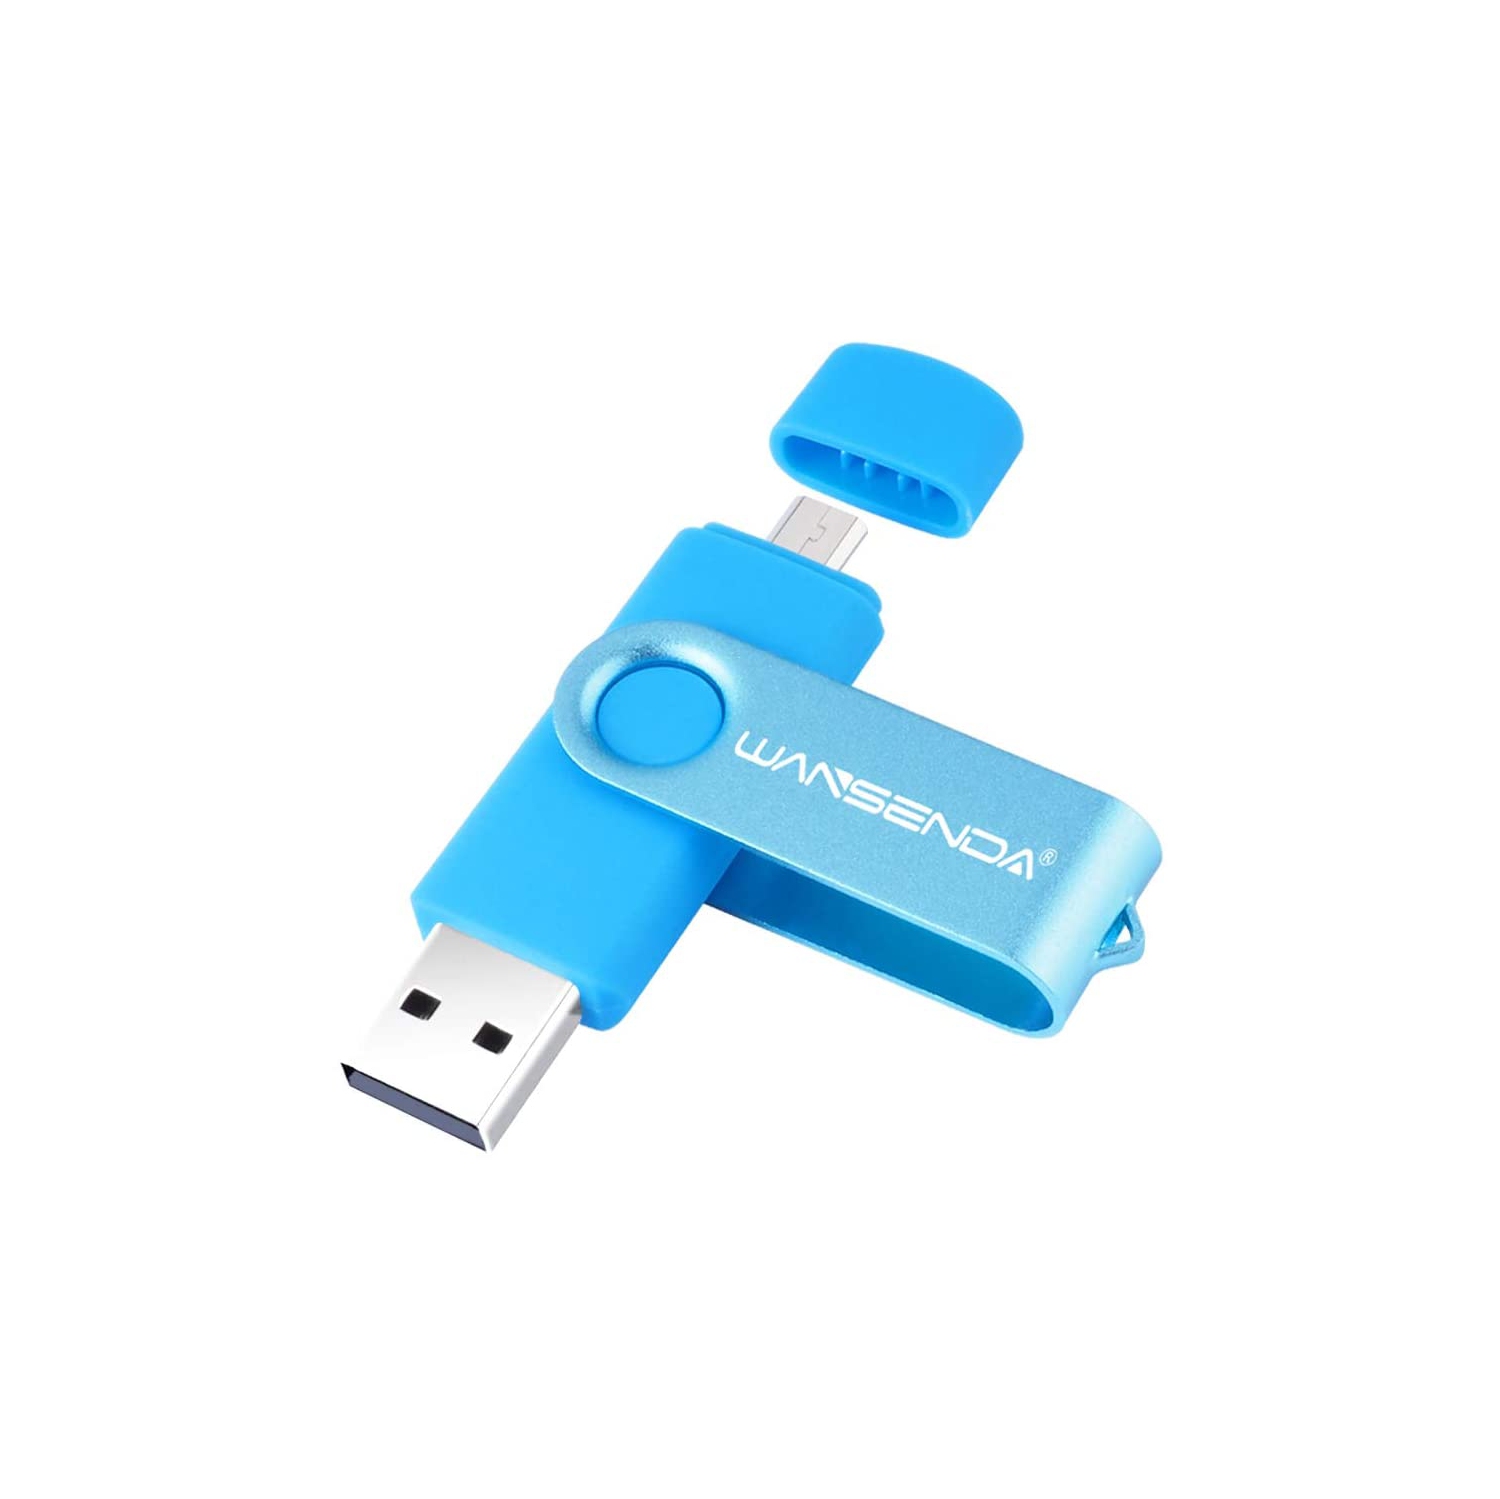 128GB Micro USB Flash Drive OTG USB Thumb Drive for Android Samsung Galaxy S7/S6/S5/S4/S3, Note5/4/3/2